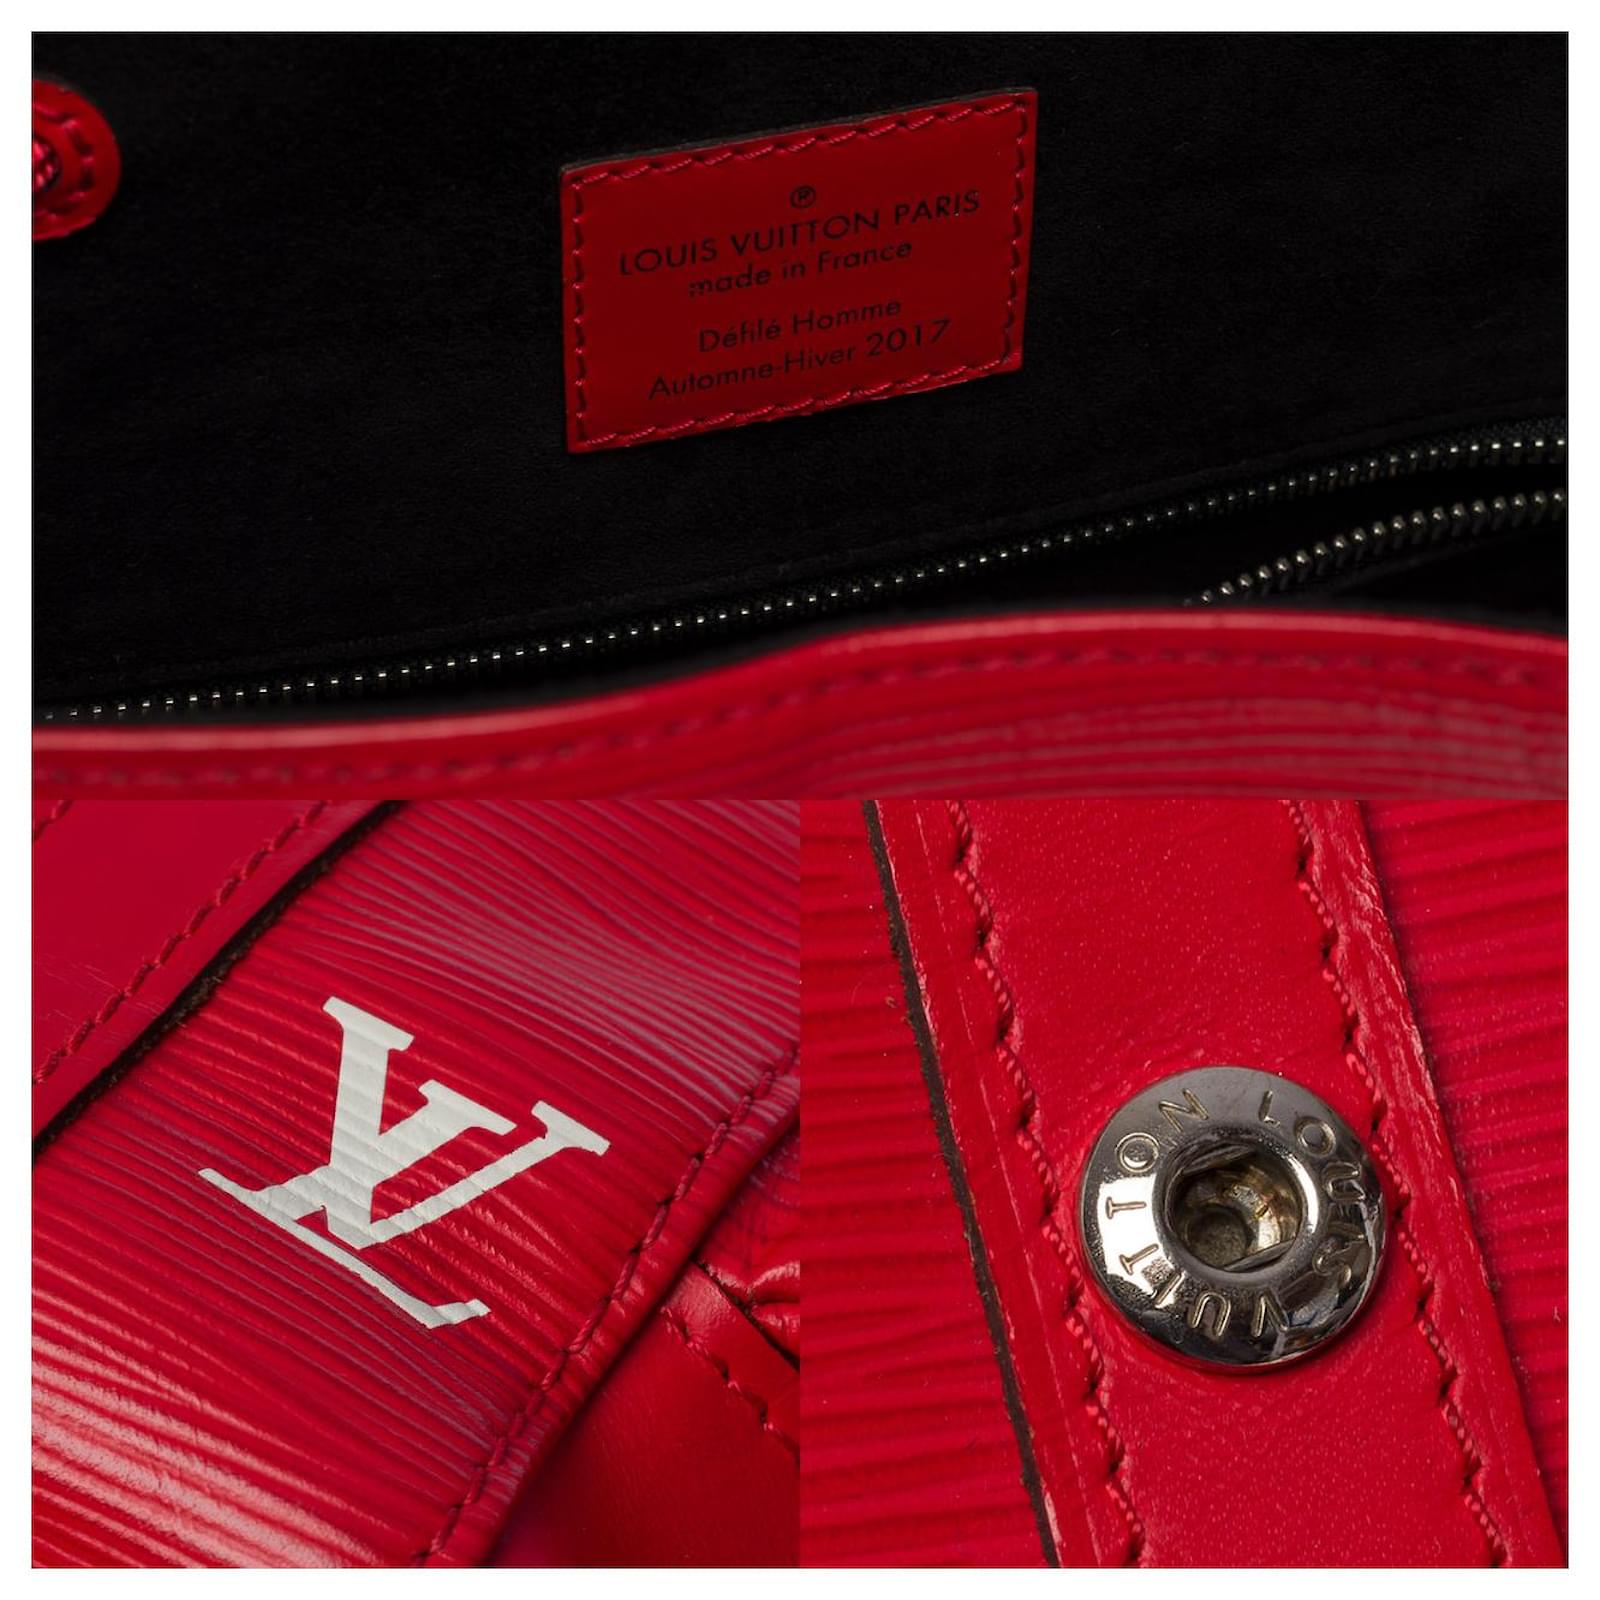 Louis Vuitton christopher pm supreme backpack in red epi